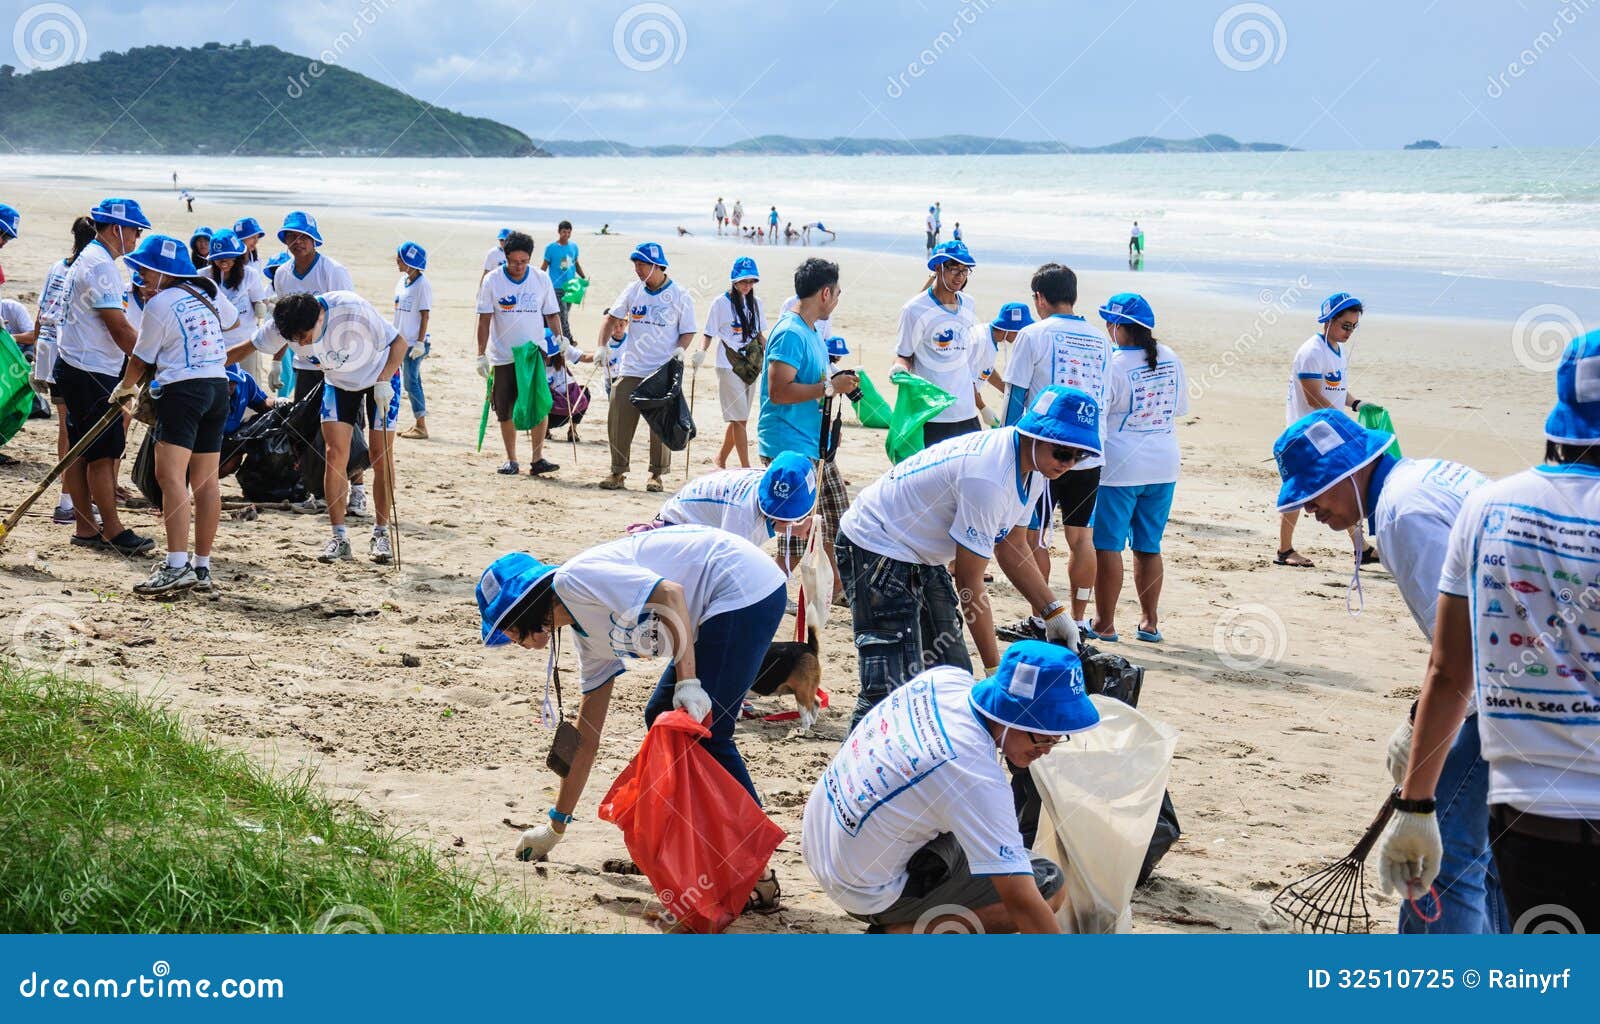 Rayong,Thailand: September 15 2012. Unidentified People Cleaning ...